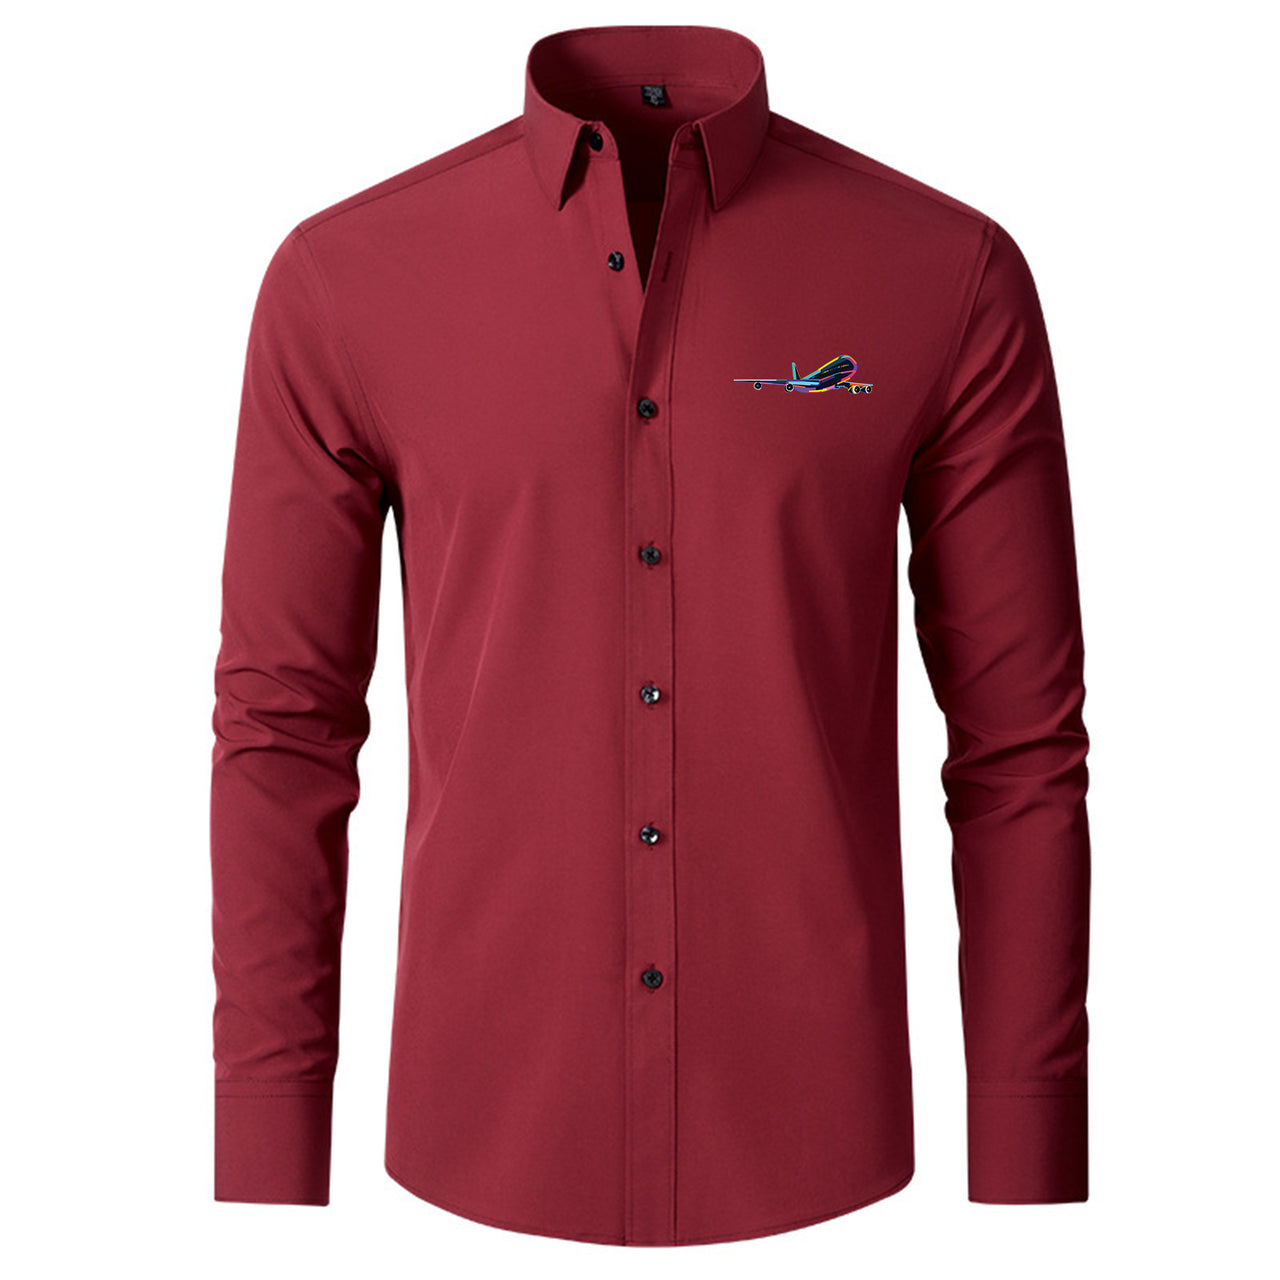 Multicolor Airplane Designed Long Sleeve Shirts